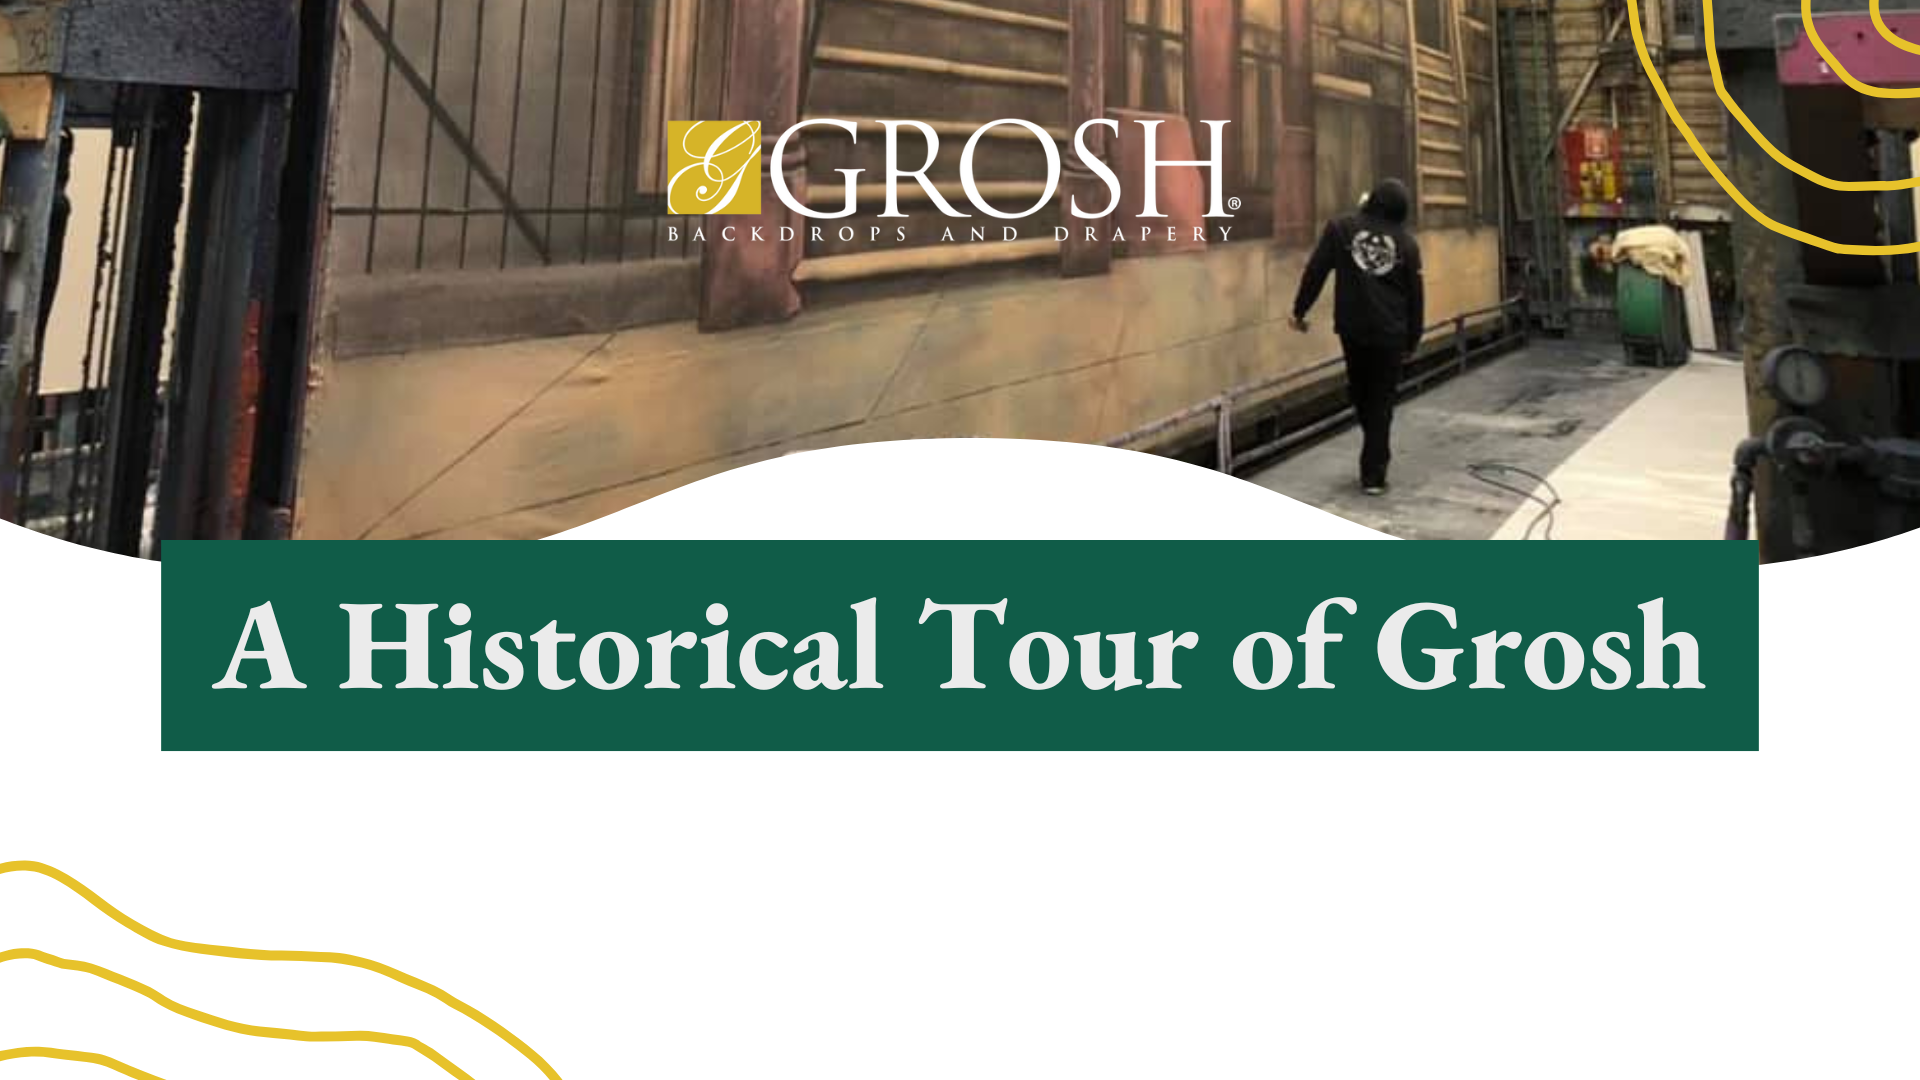 A Historical Tour of Grosh